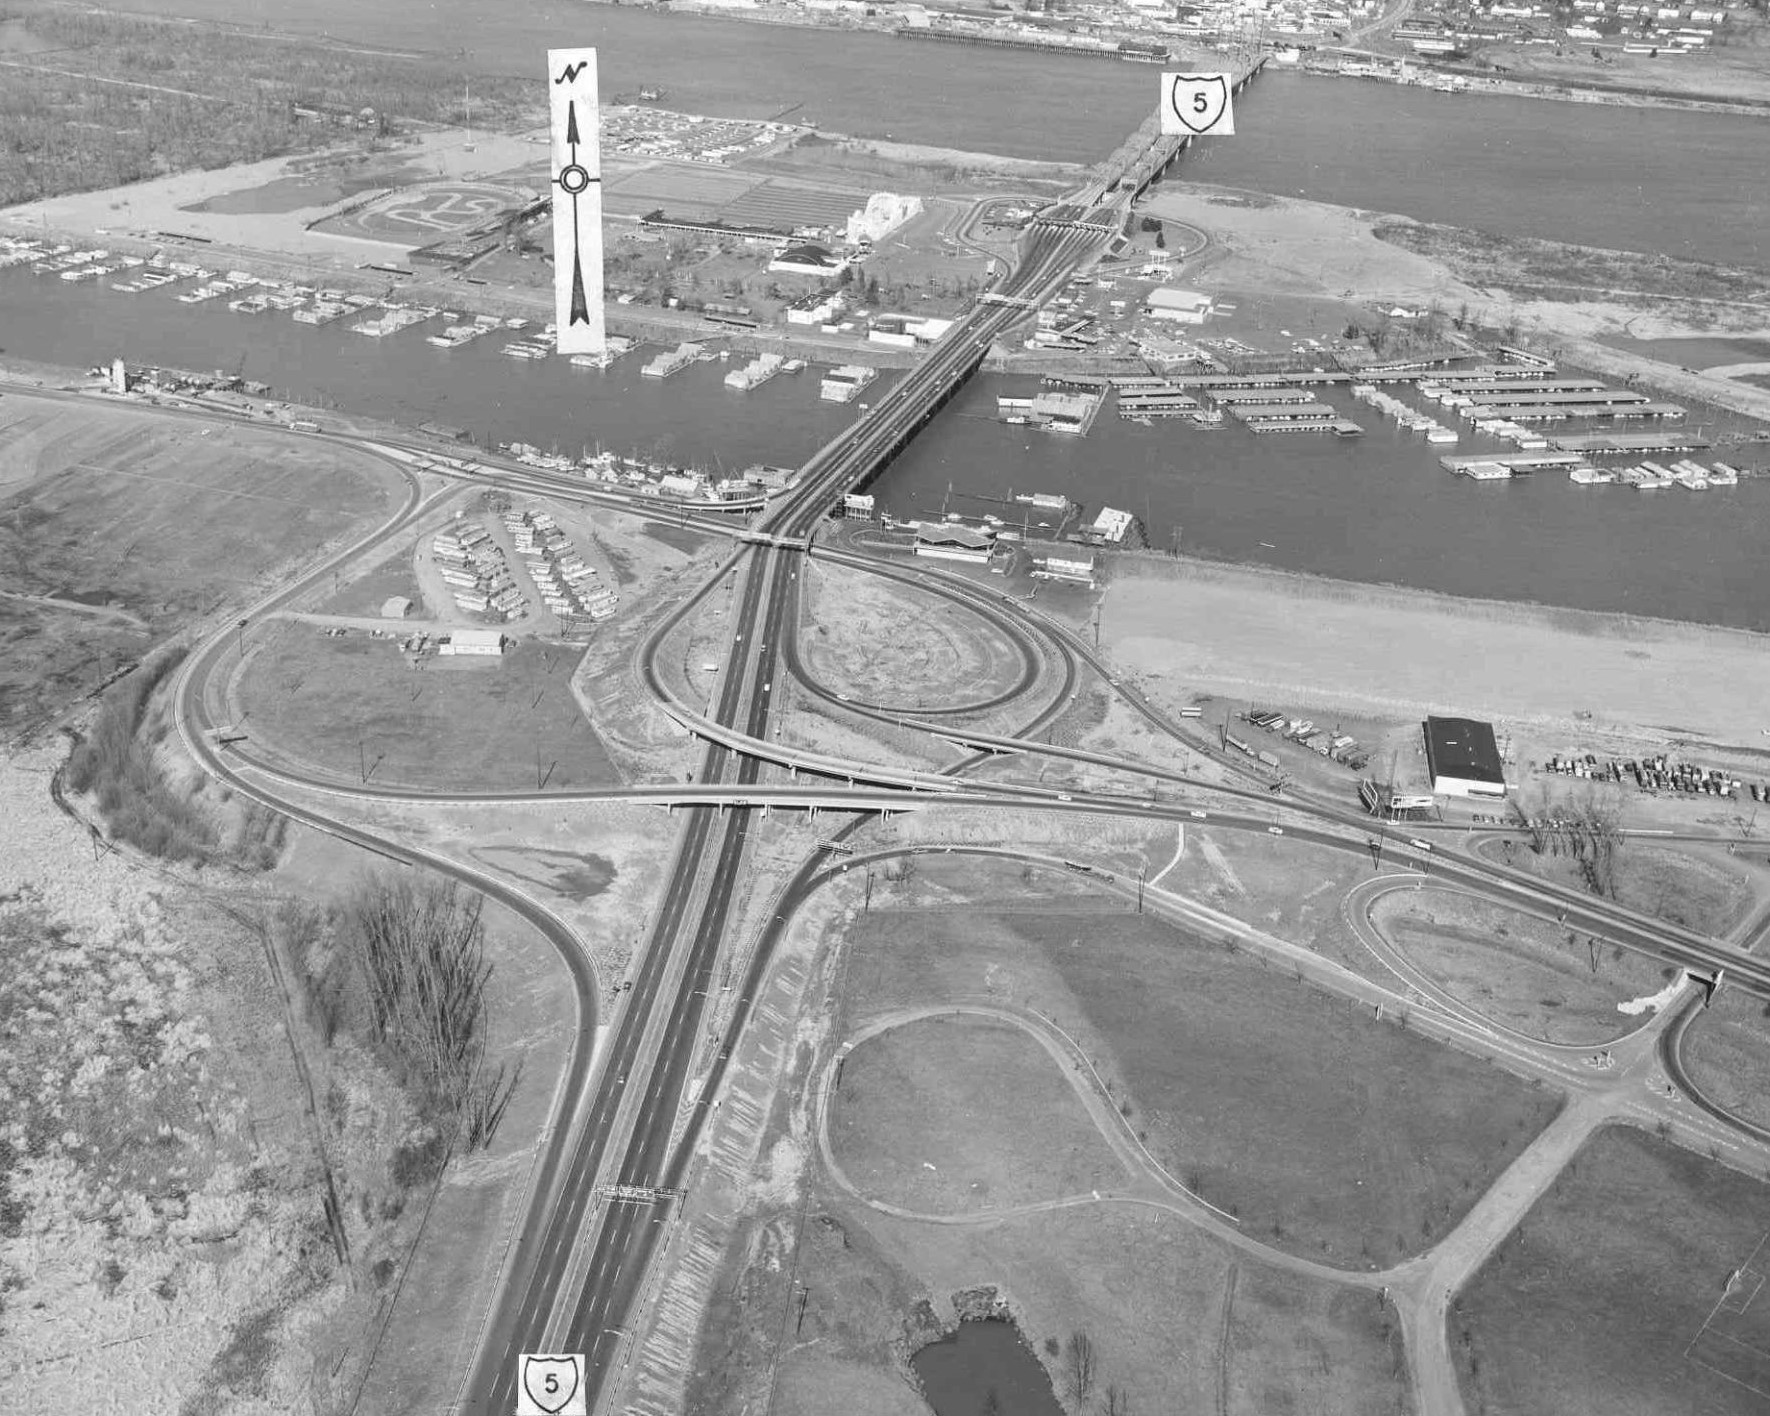 Historic black and white photo of the I-5 corridor from 1956 shows little development